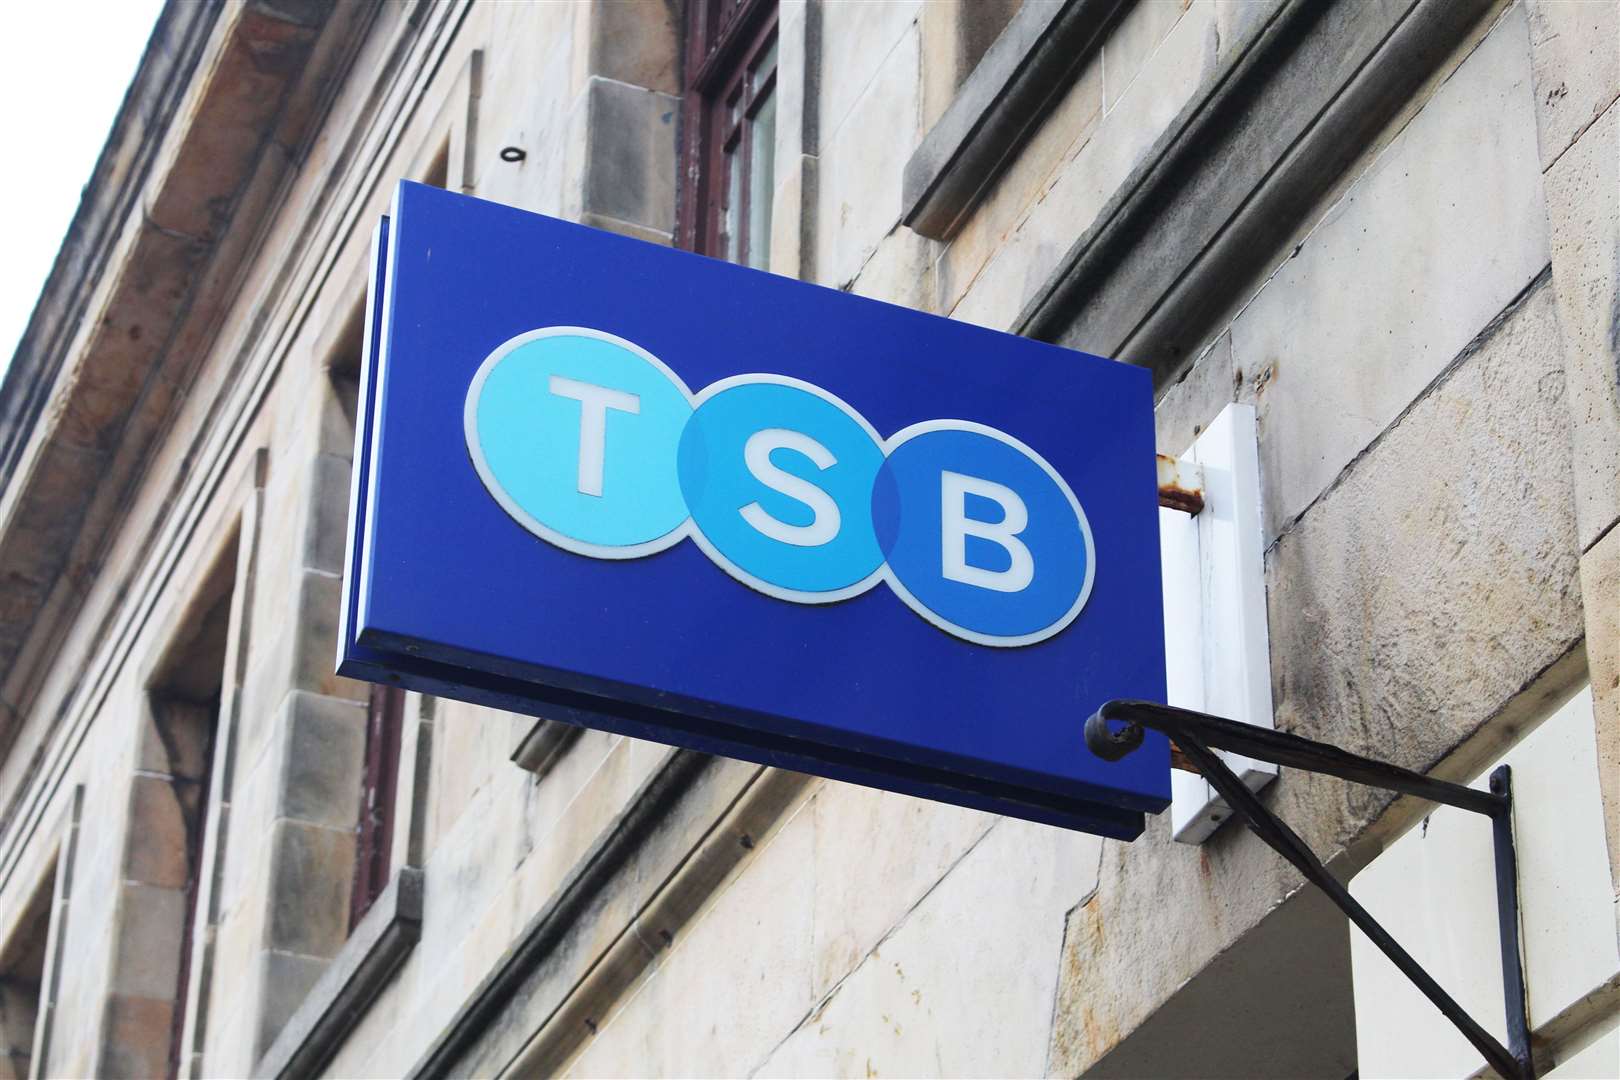 TSB is shutting its branches in Dingwall, Nairn, Wick and Grantown-on-Spey